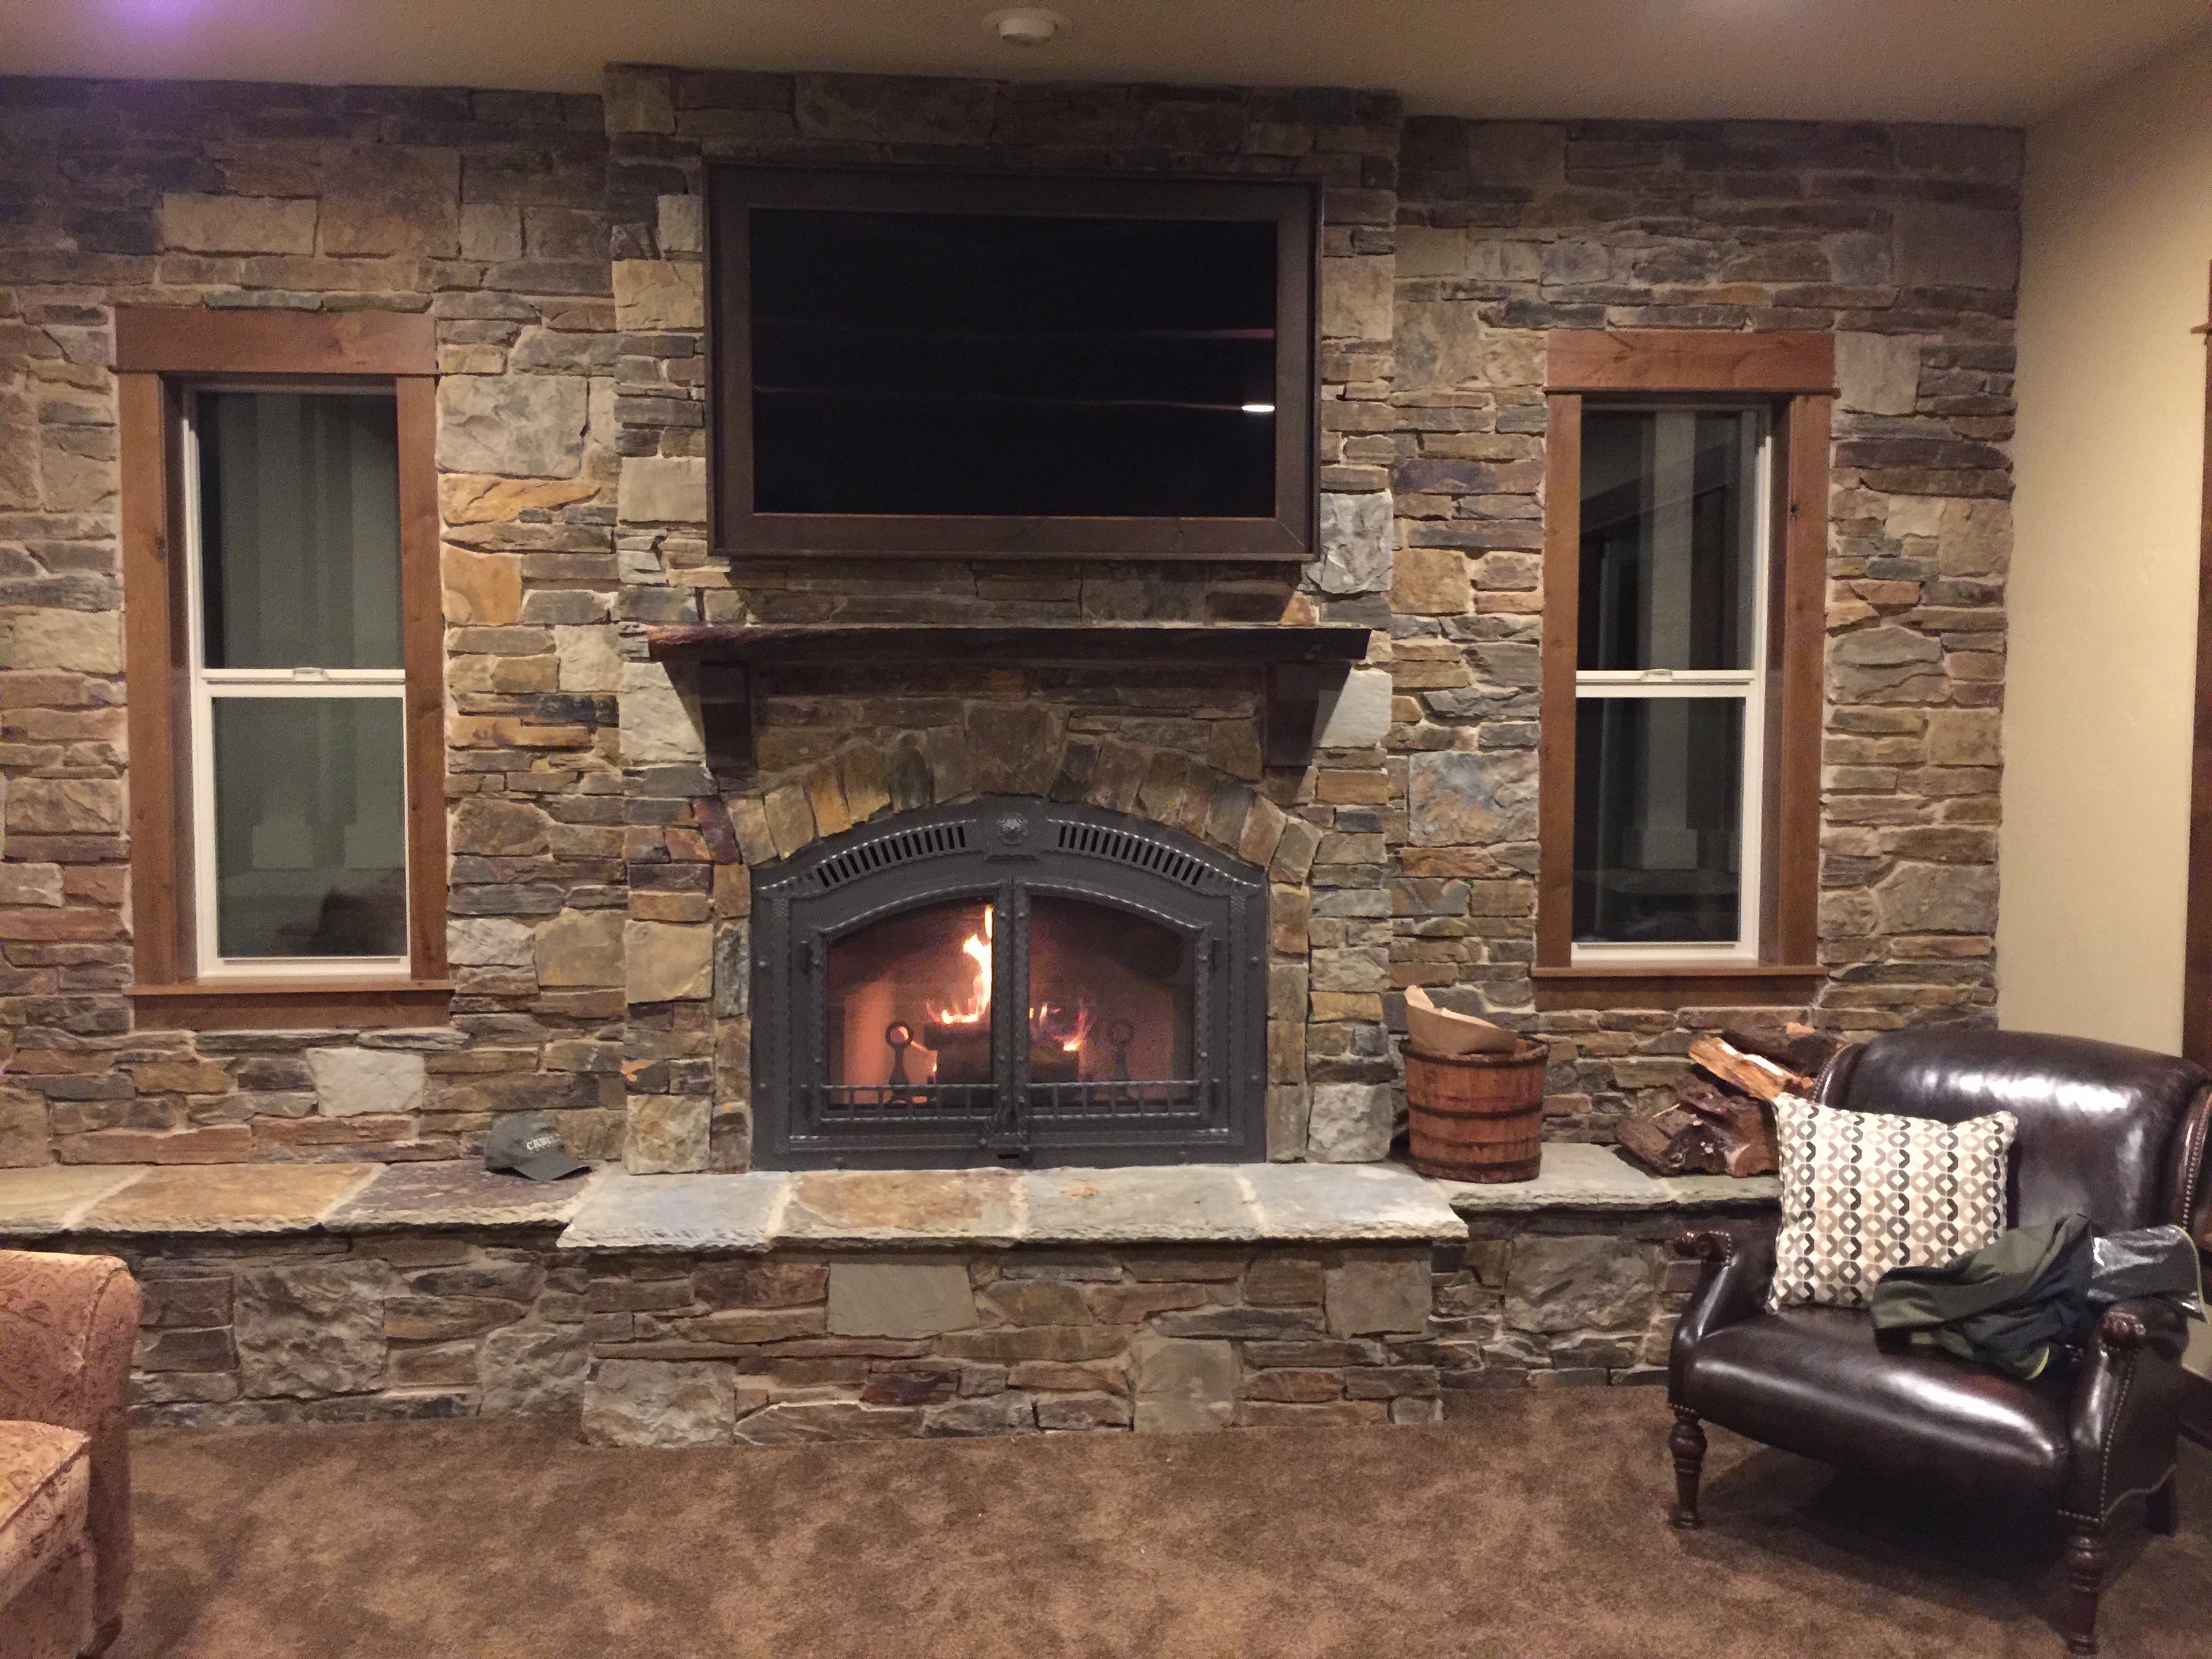 Custome Fire Place, call 503-319-1525